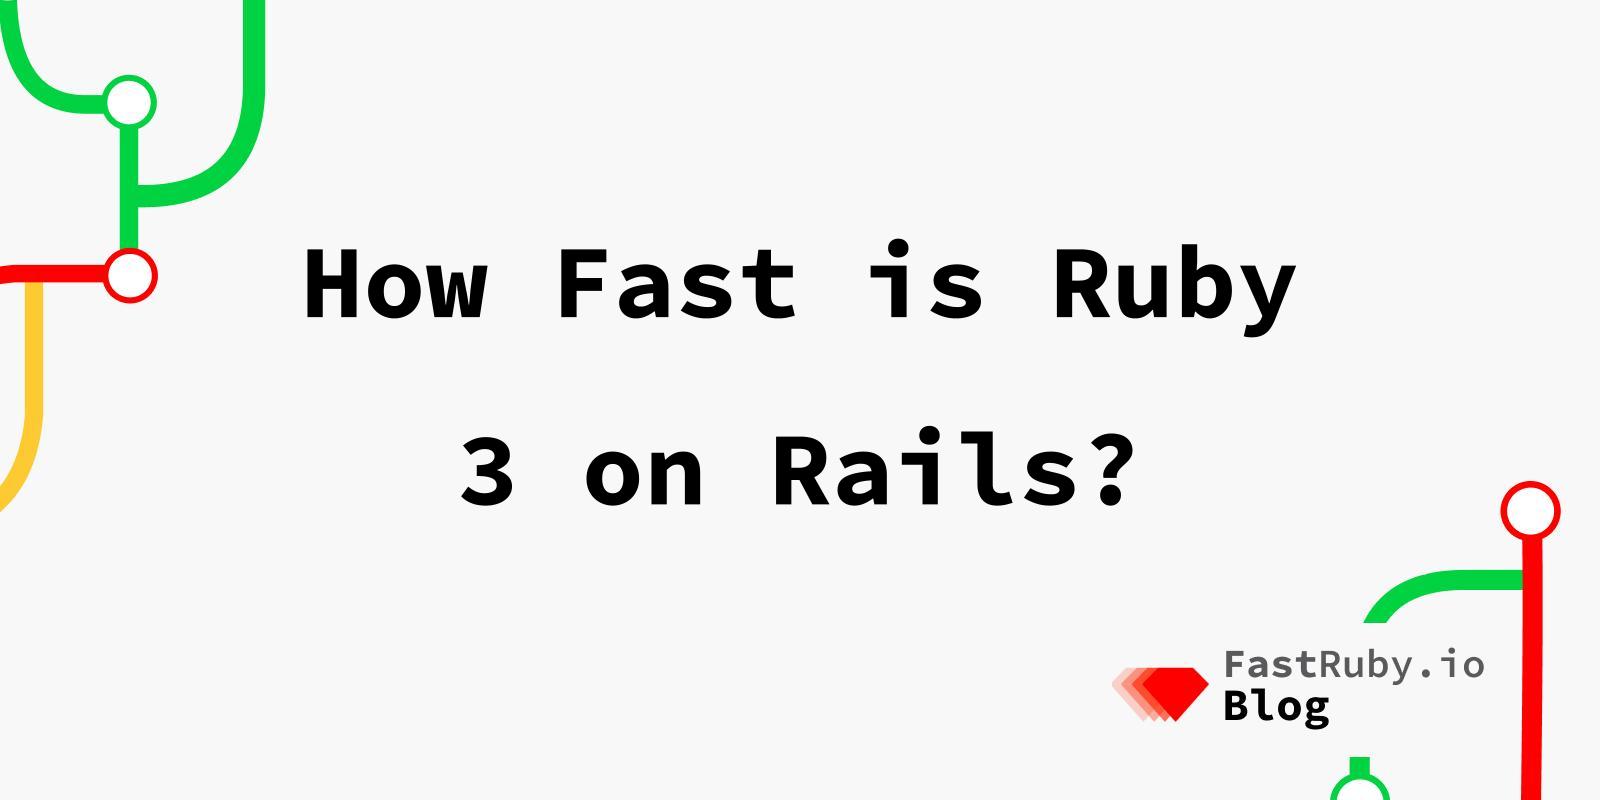 How Fast is Ruby 3 on Rails?